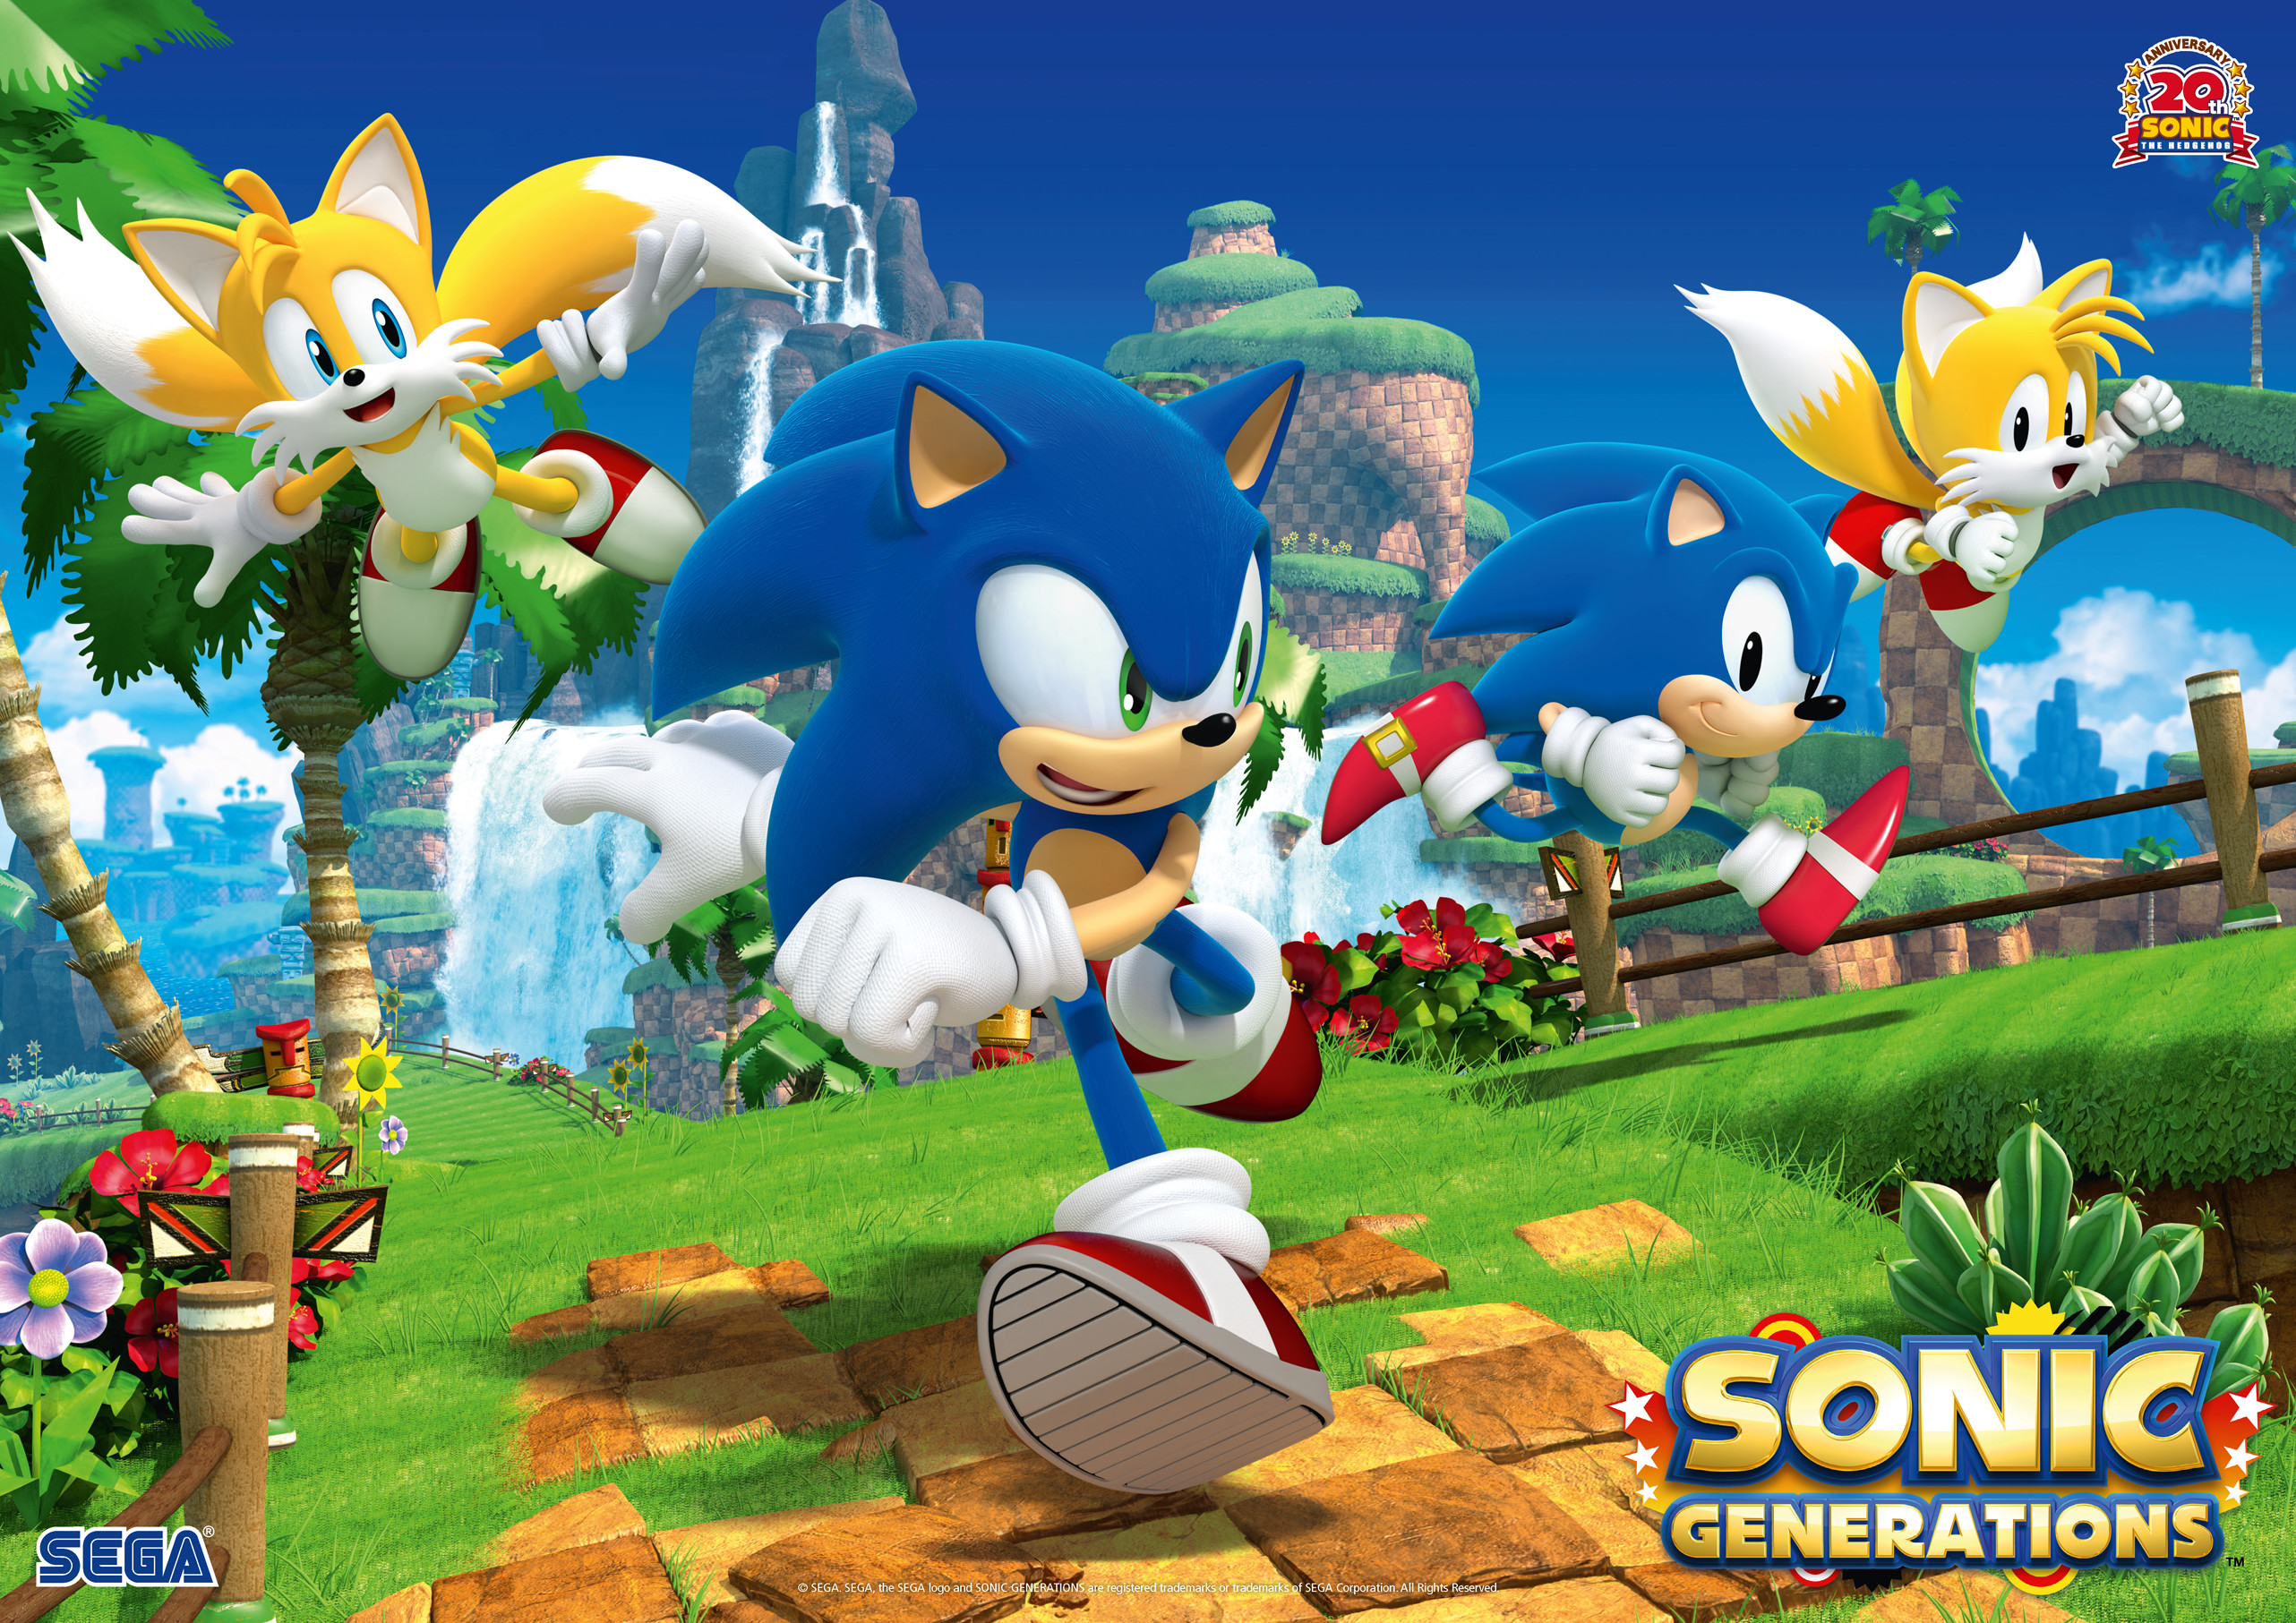 General 2564x1813 Sonic Sonic the Hedgehog Sonic Generations Tails (character) Sega video game art PC gaming video game characters video games artwork